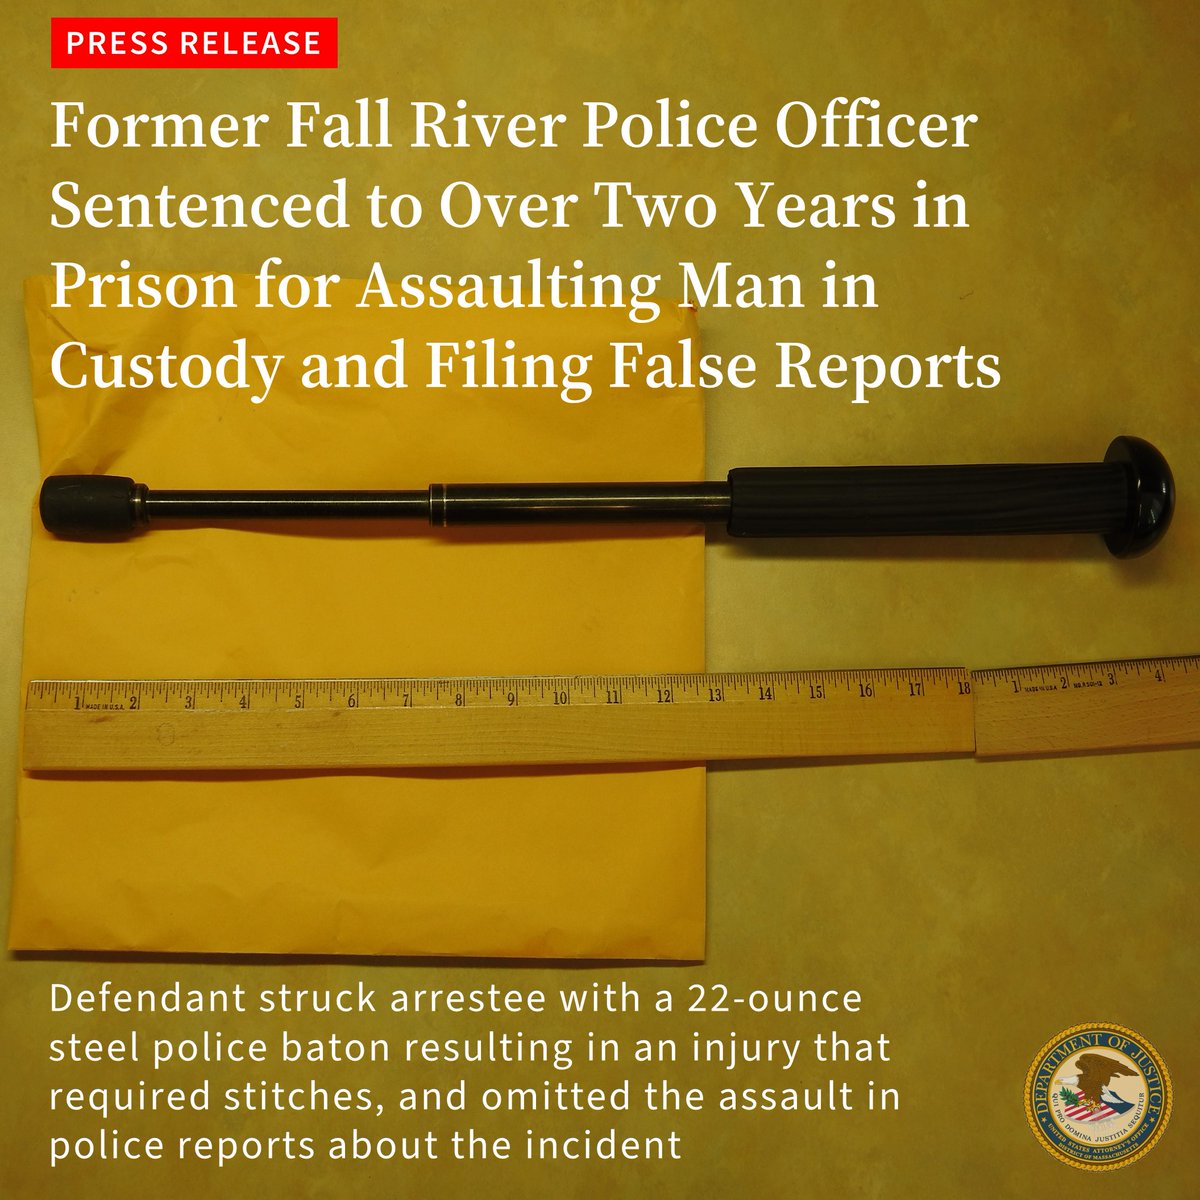 Former Fall River Police Officer sentenced to over two years in prison for assaulting a man in custody with a baton and failing to report the assault in subsequent reports. 🔗justice.gov/usao-ma/pr/for…